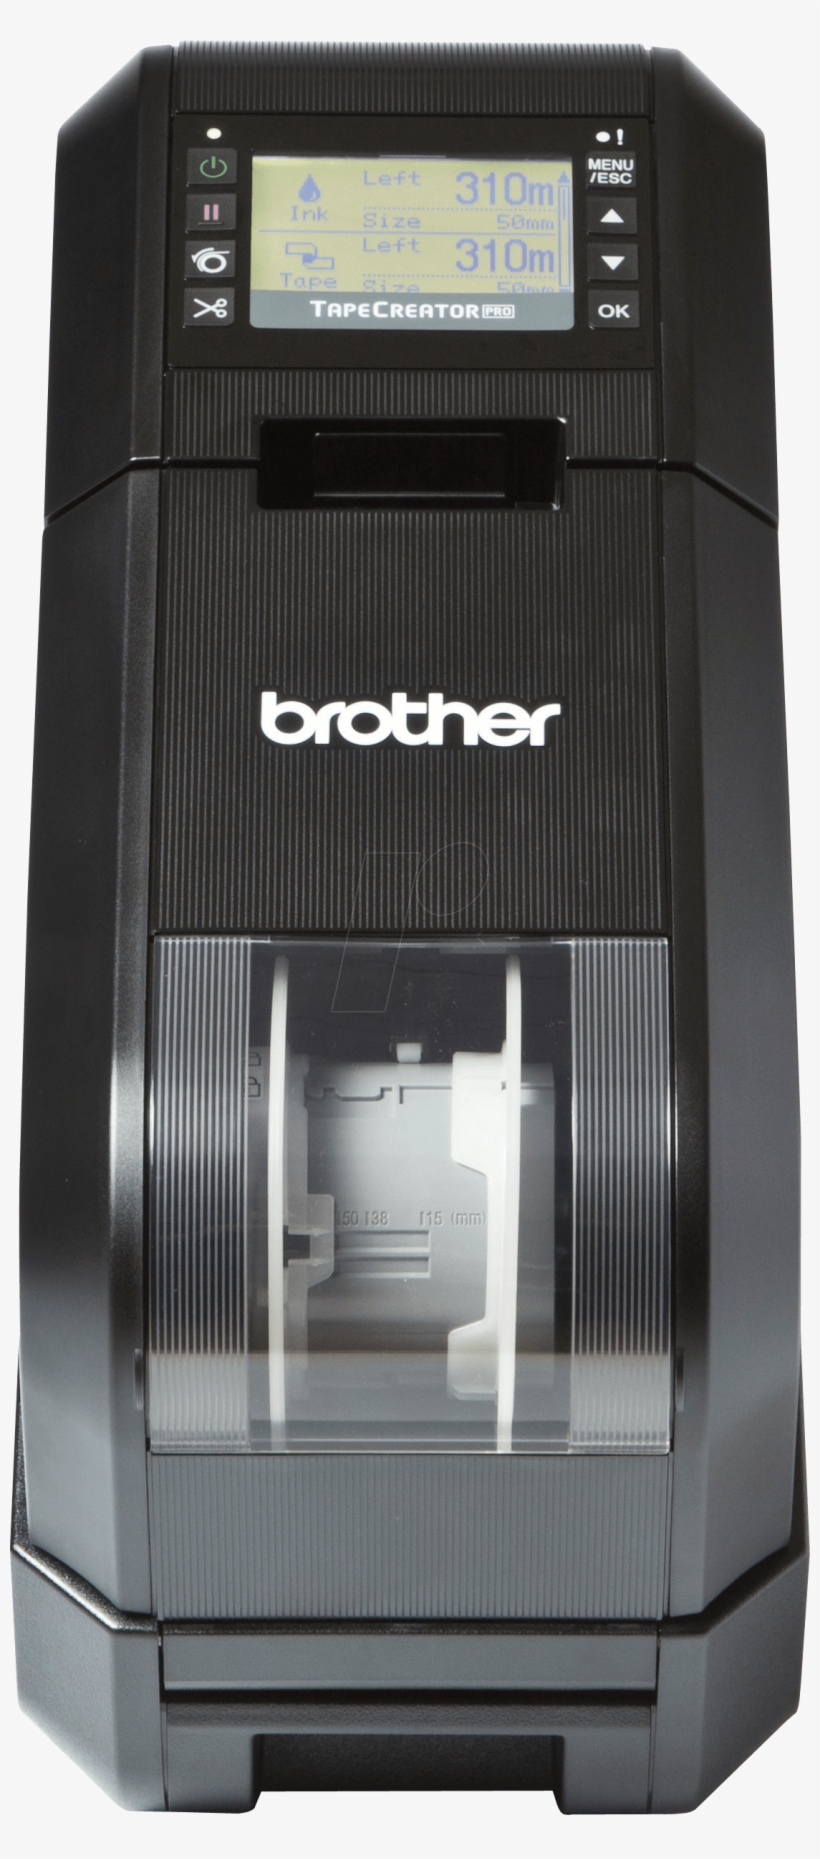 Tape Creator, Tape And Fabric Roll Printing, Up To - Brother Tape Creator Pro Tp-m5000n, transparent png #5780217